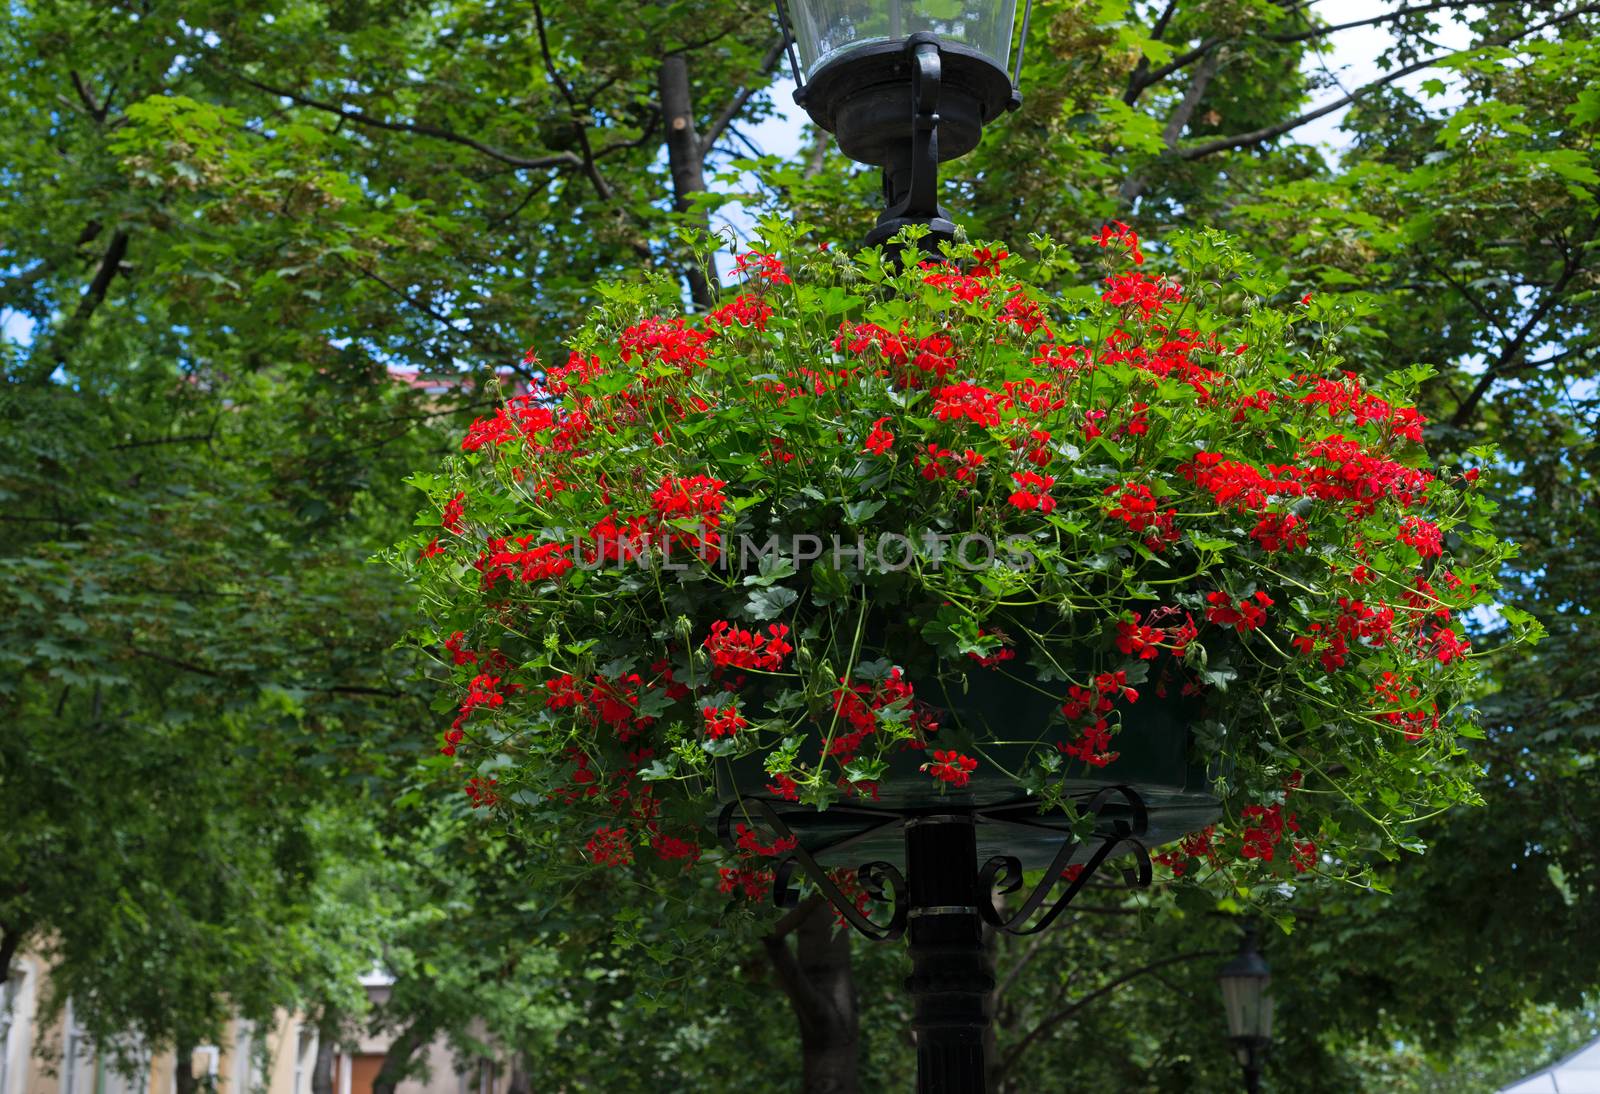 street lamp with hanging flower baskets